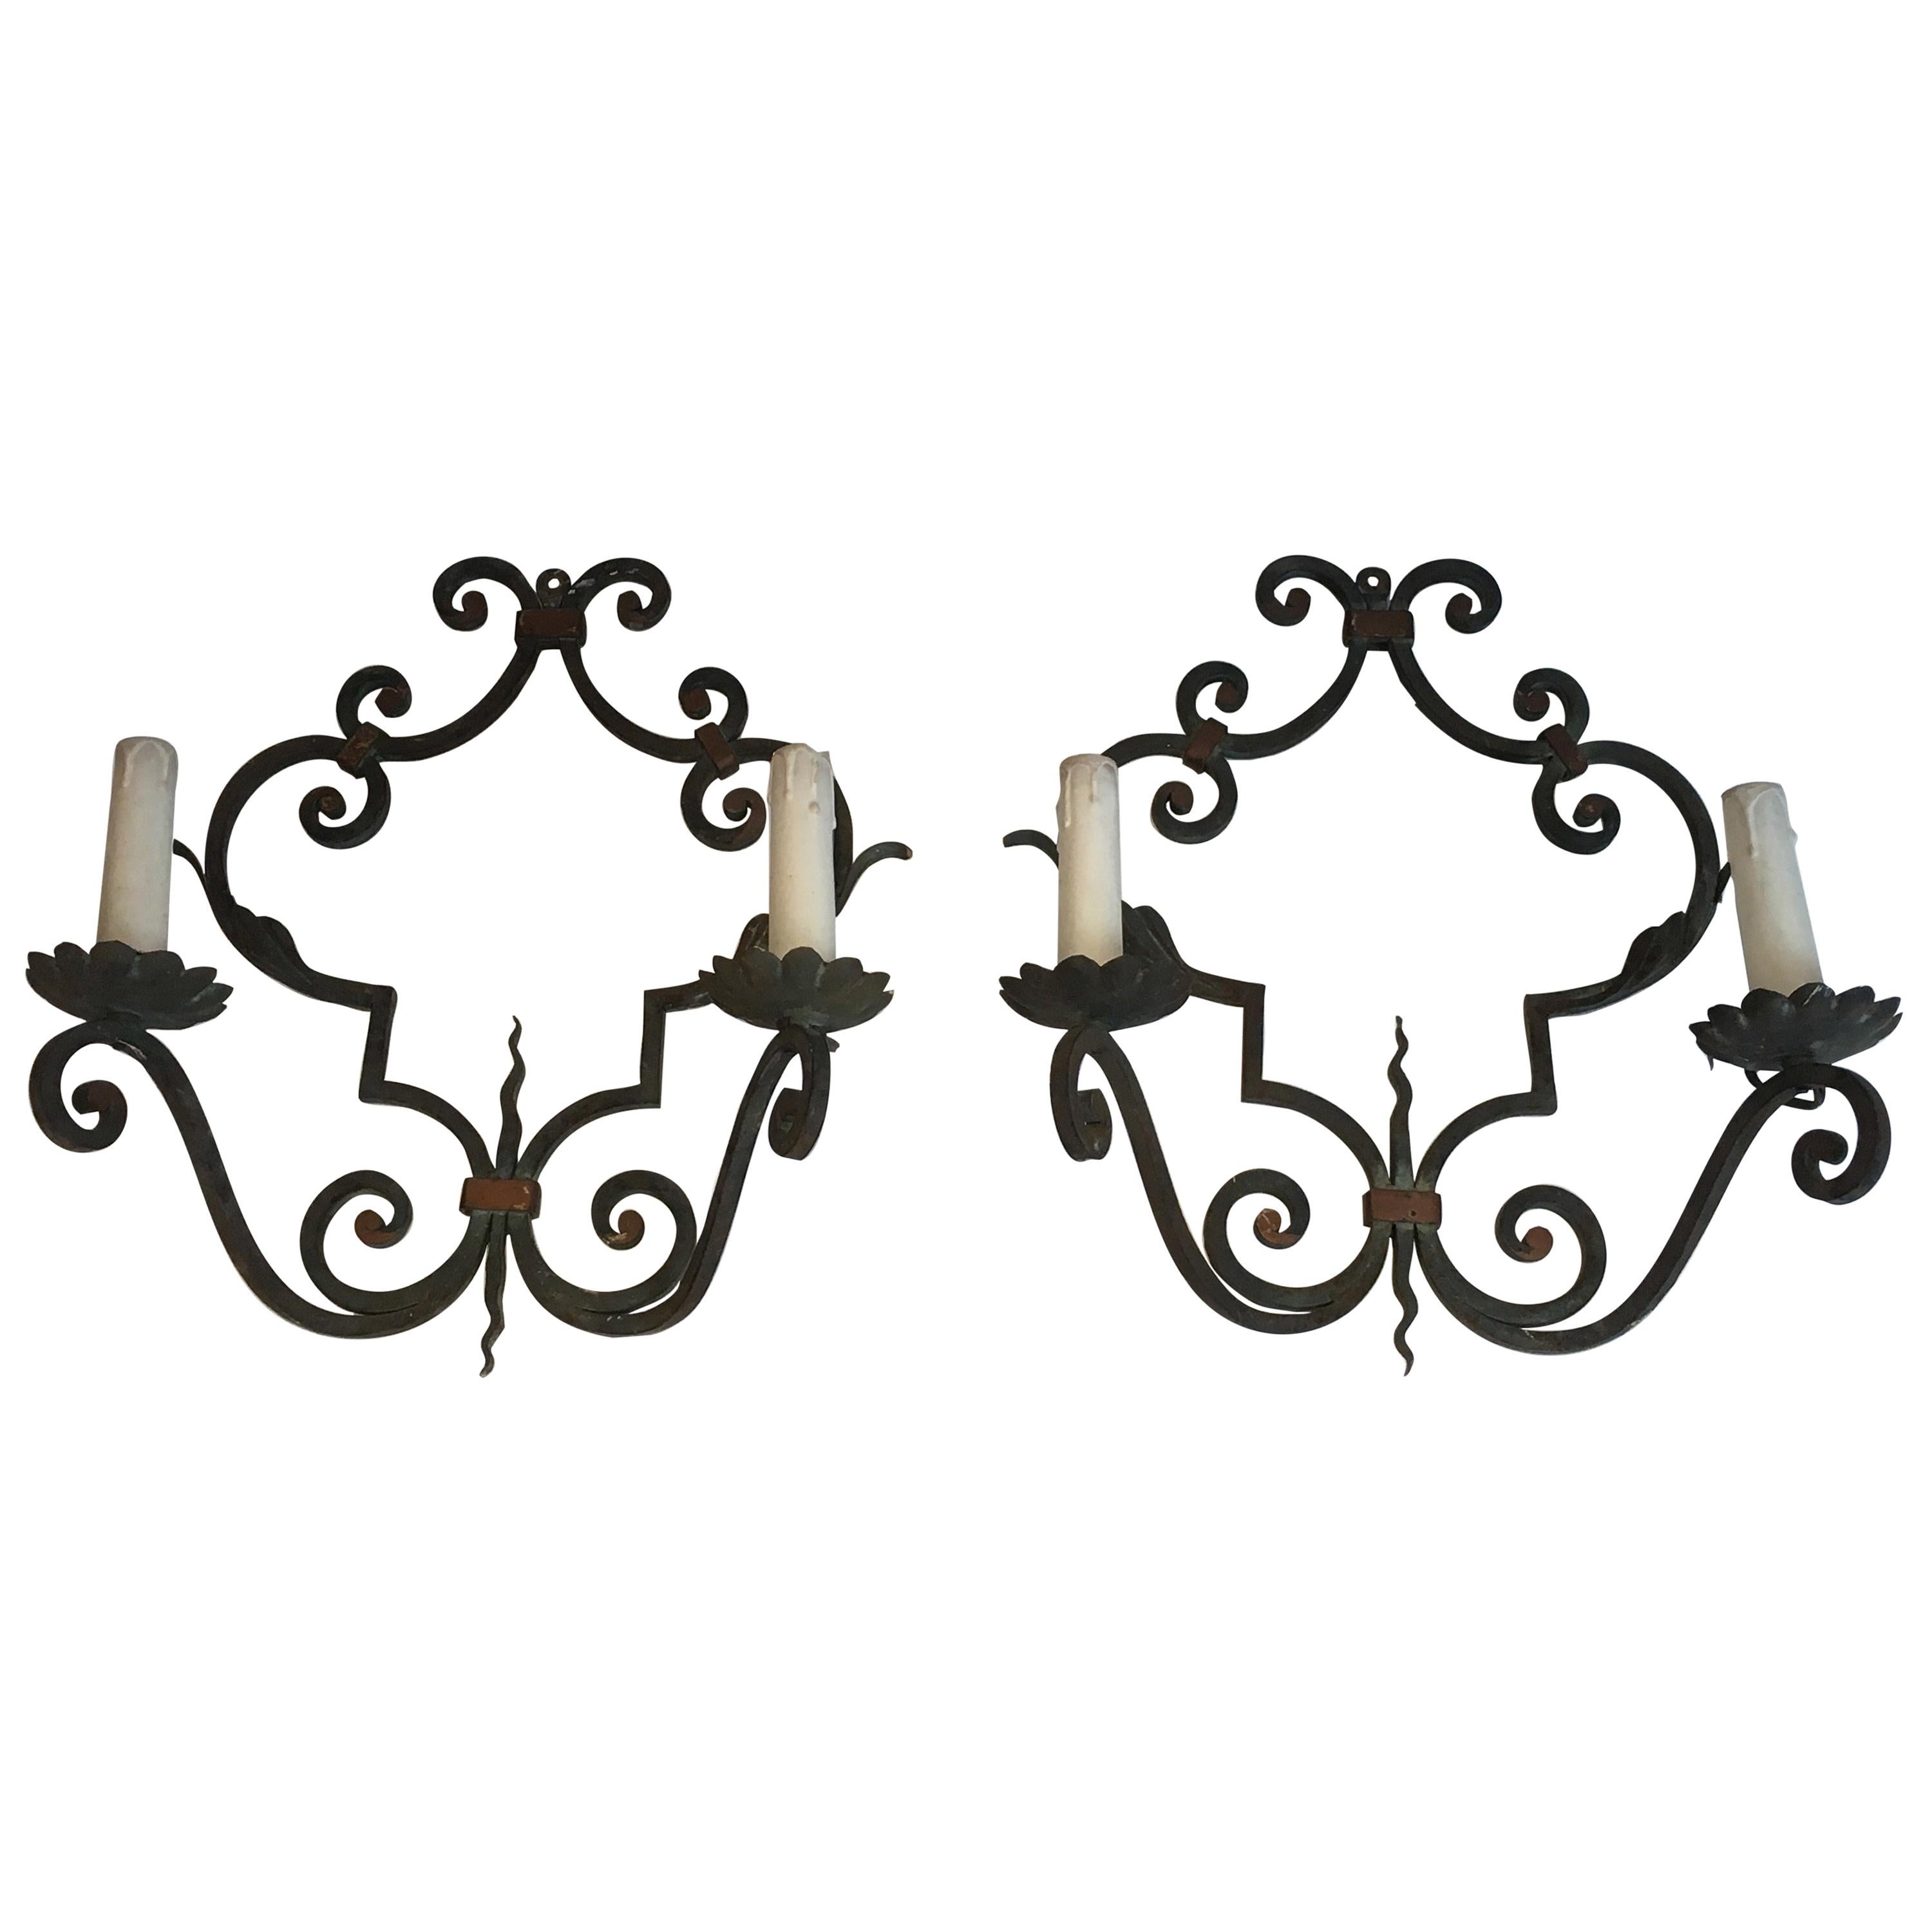 Pair of Large Decorative Wrought Iron Wall Sconces, French, circa 1950